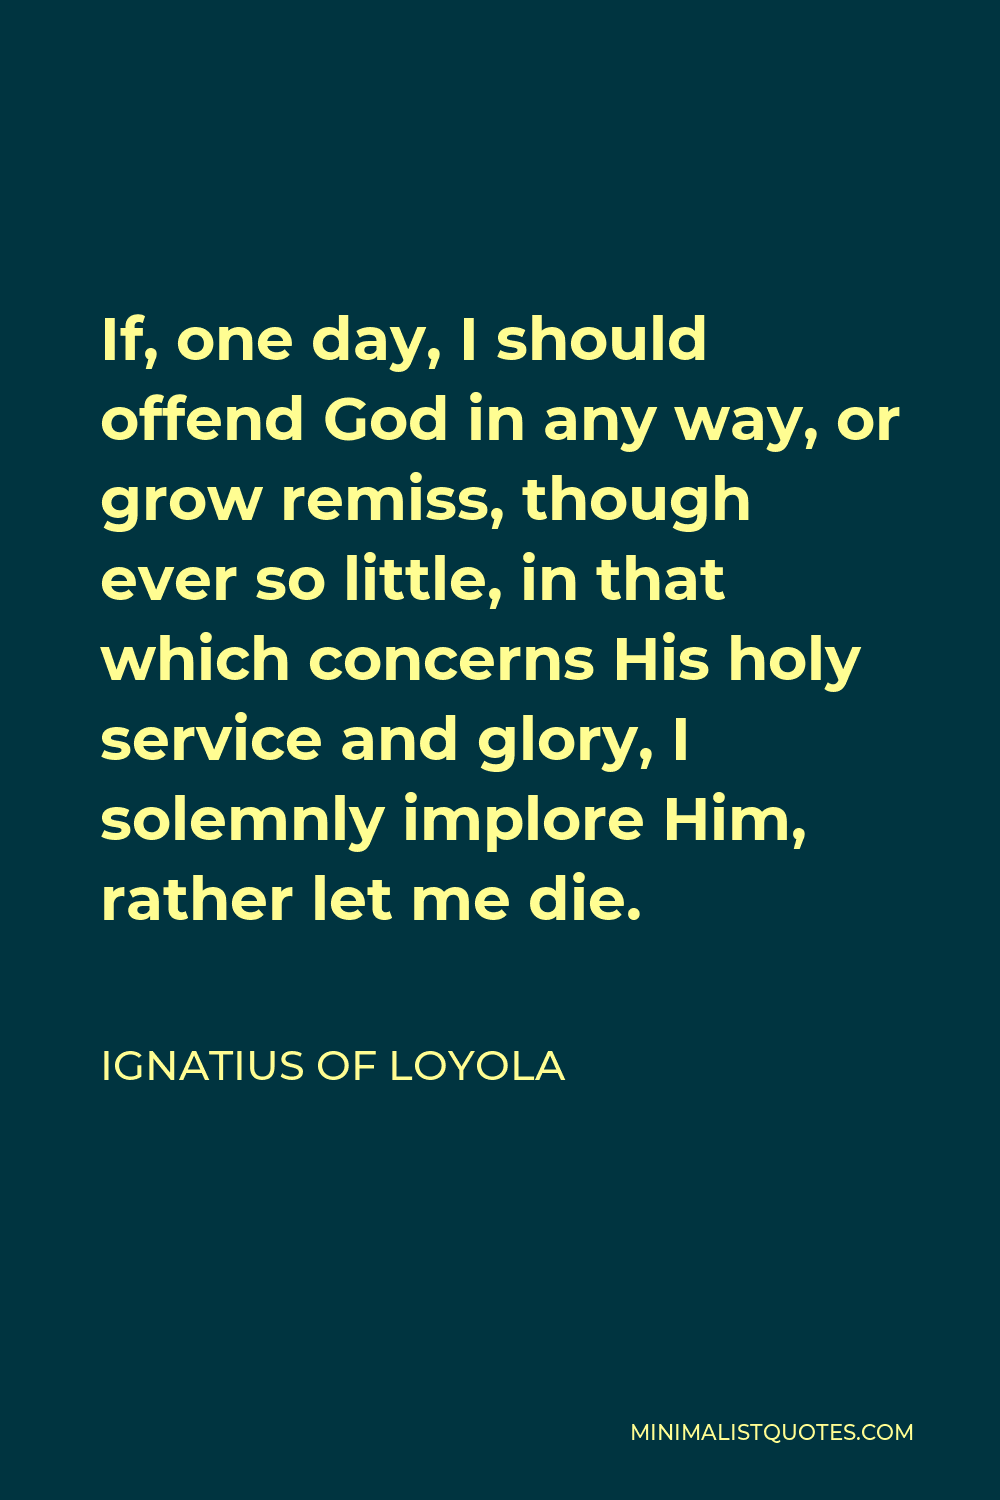 Ignatius of Loyola Quote - If, one day, I should offend God in any way, or grow remiss, though ever so little, in that which concerns His holy service and glory, I solemnly implore Him, rather let me die.